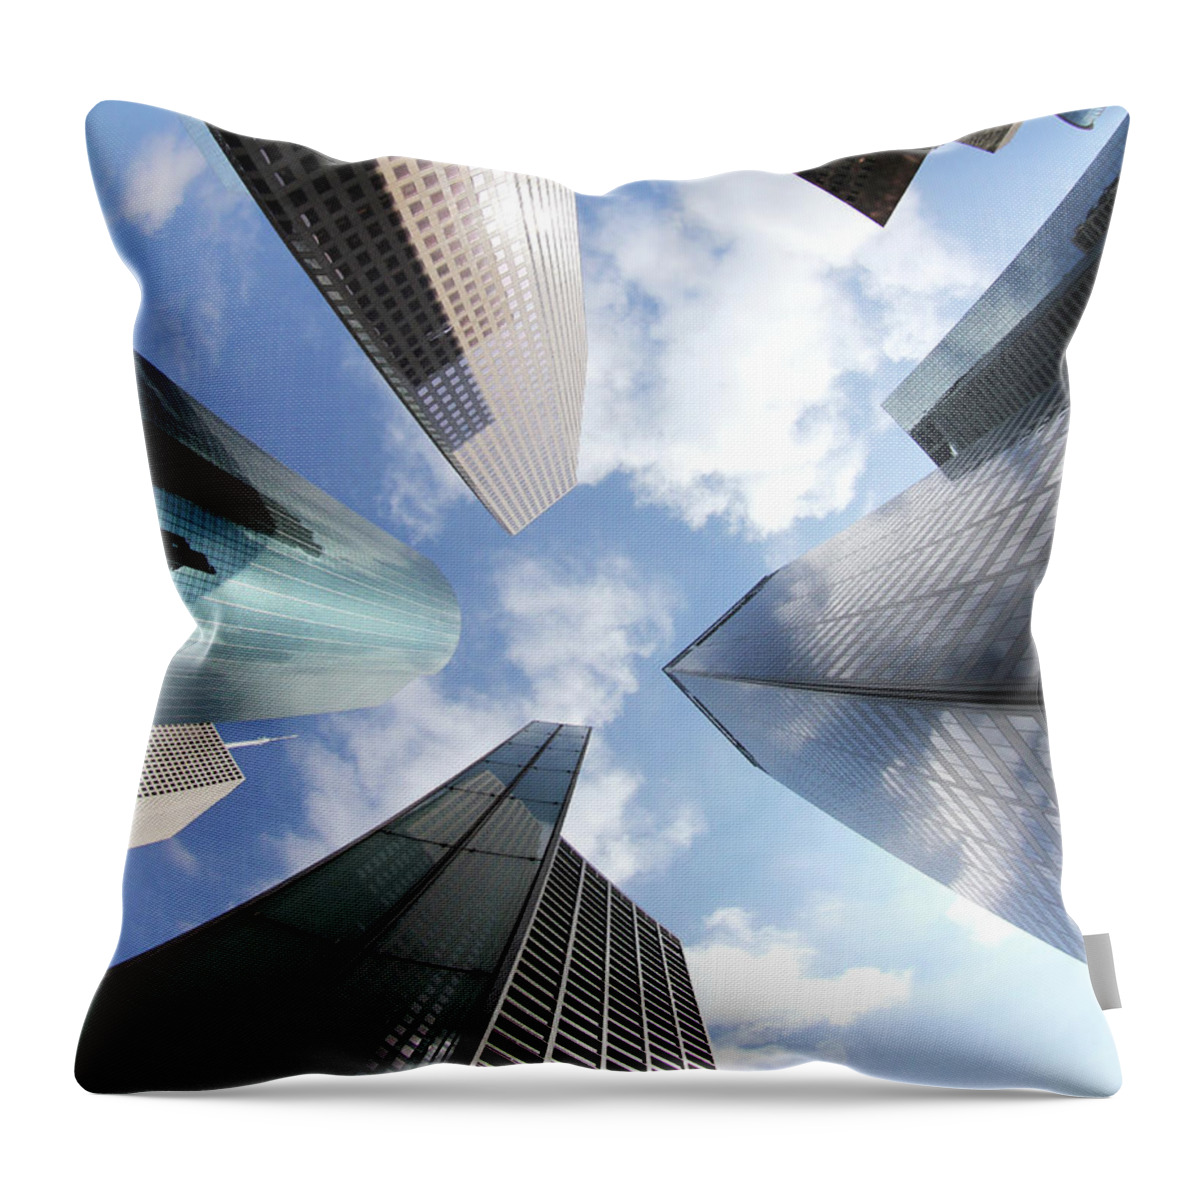 Downtown District Throw Pillow featuring the photograph Skyline by Michael Peña